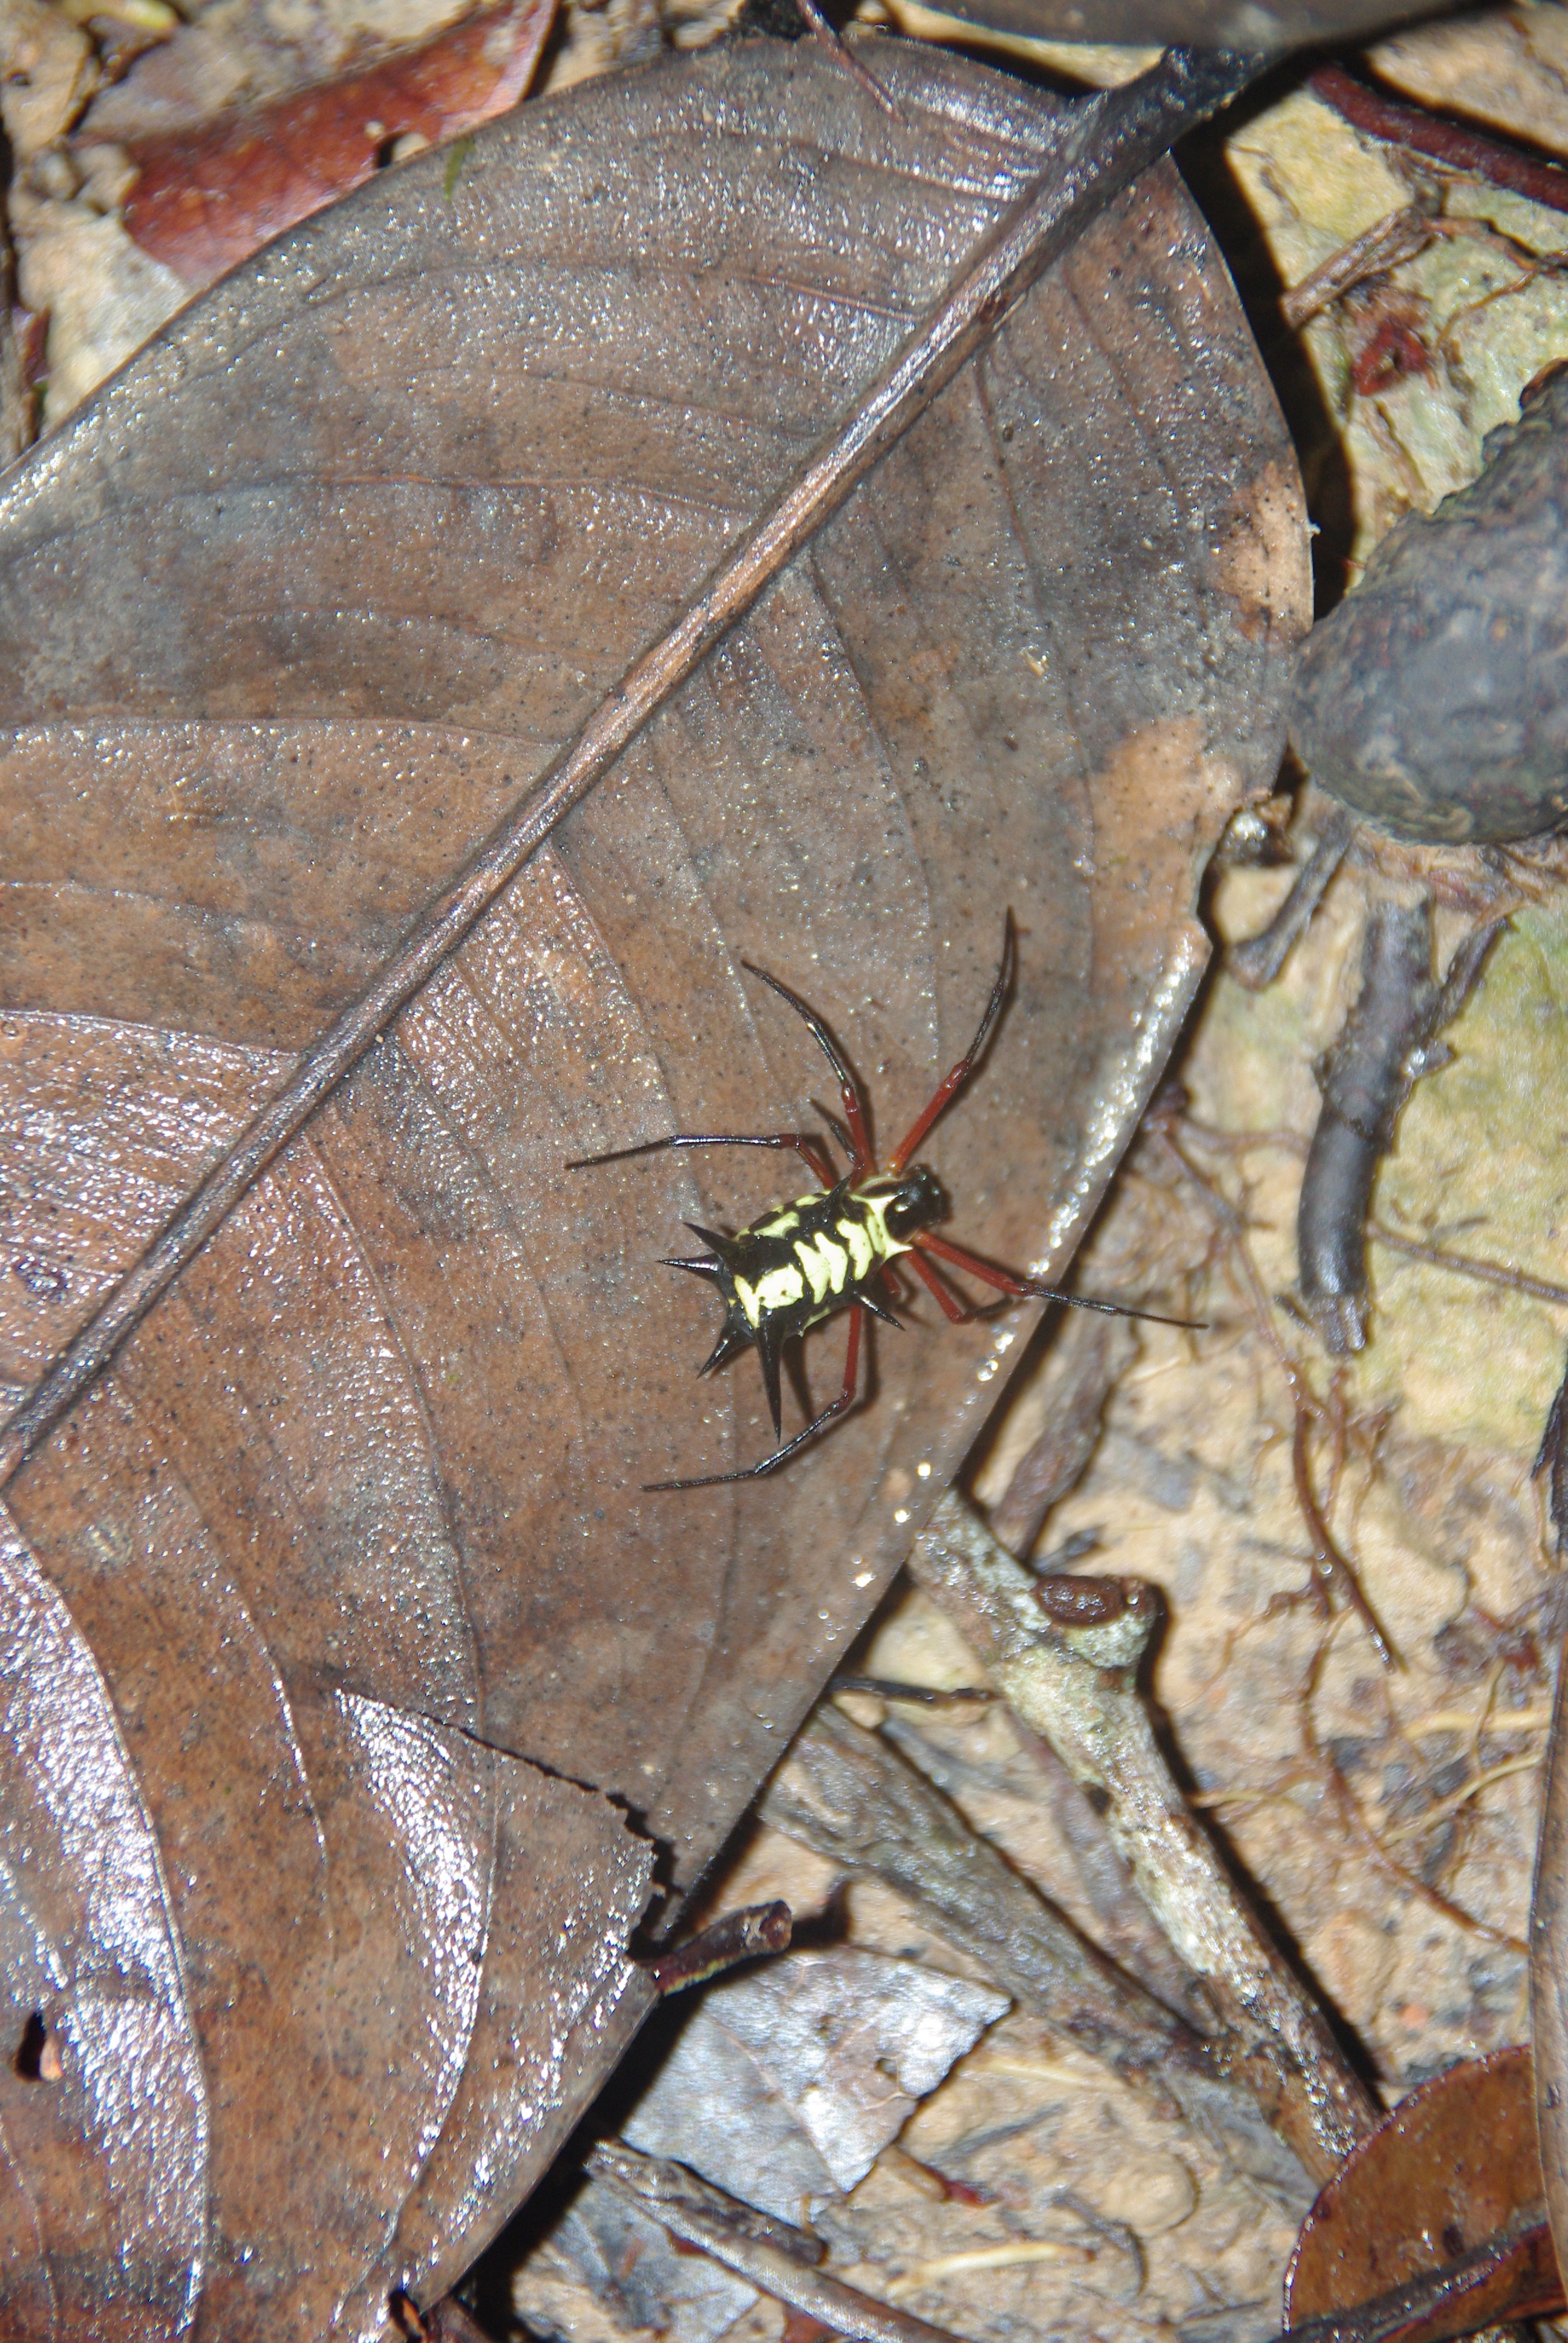 A brightly-colored spider seems to warn predators to stay away. Amazonian wildlife watching tends to consist of looking under leaves and rotten logs.